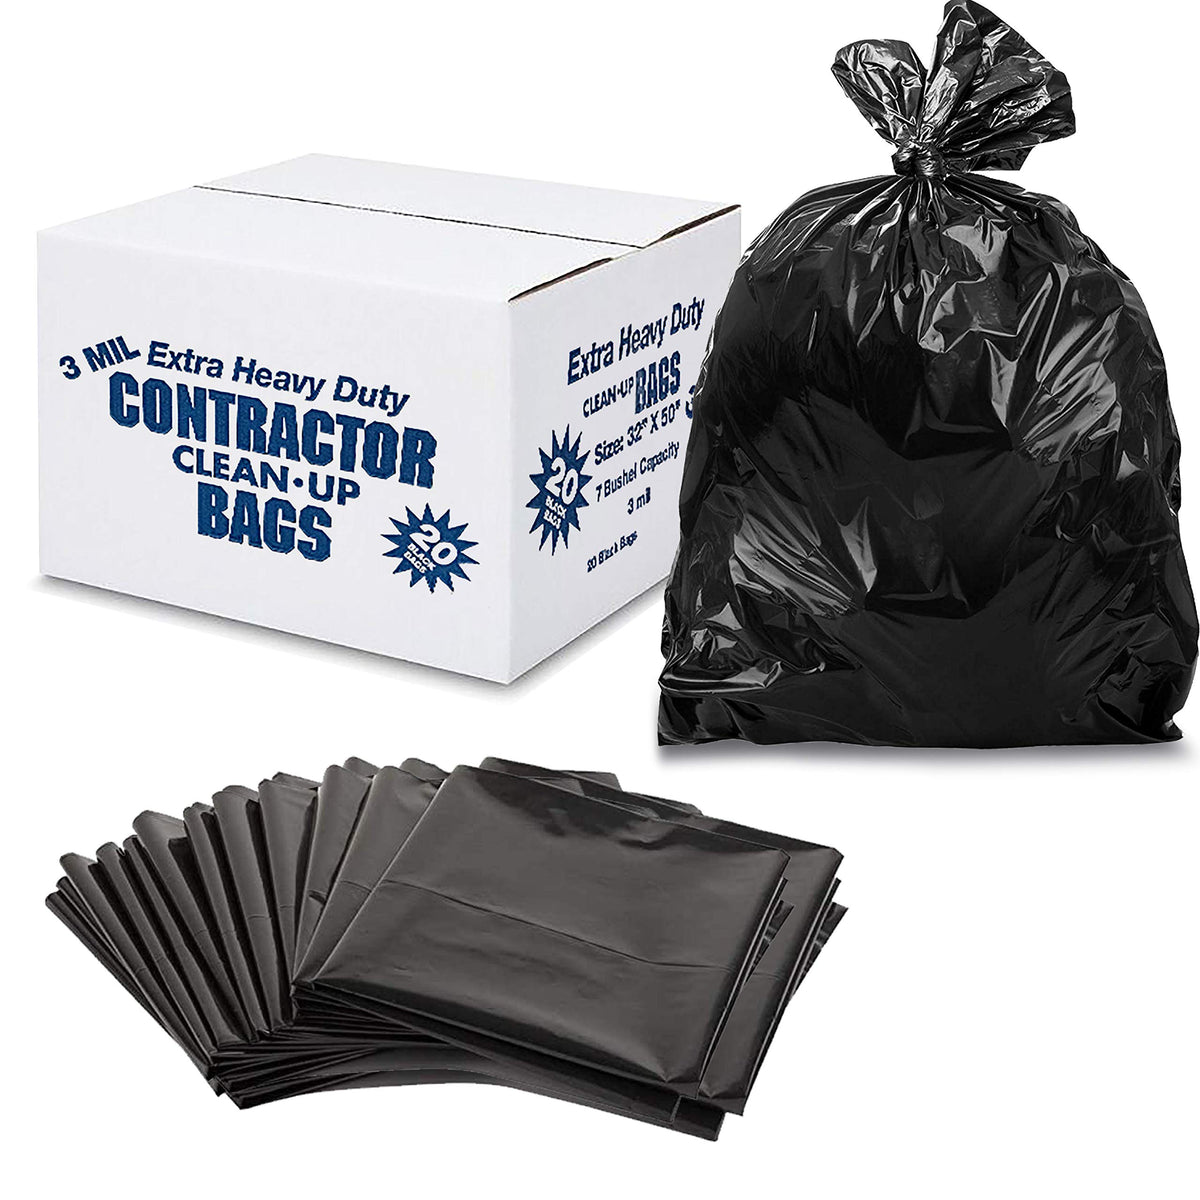 Contractor Bags - Neoteric Packaging